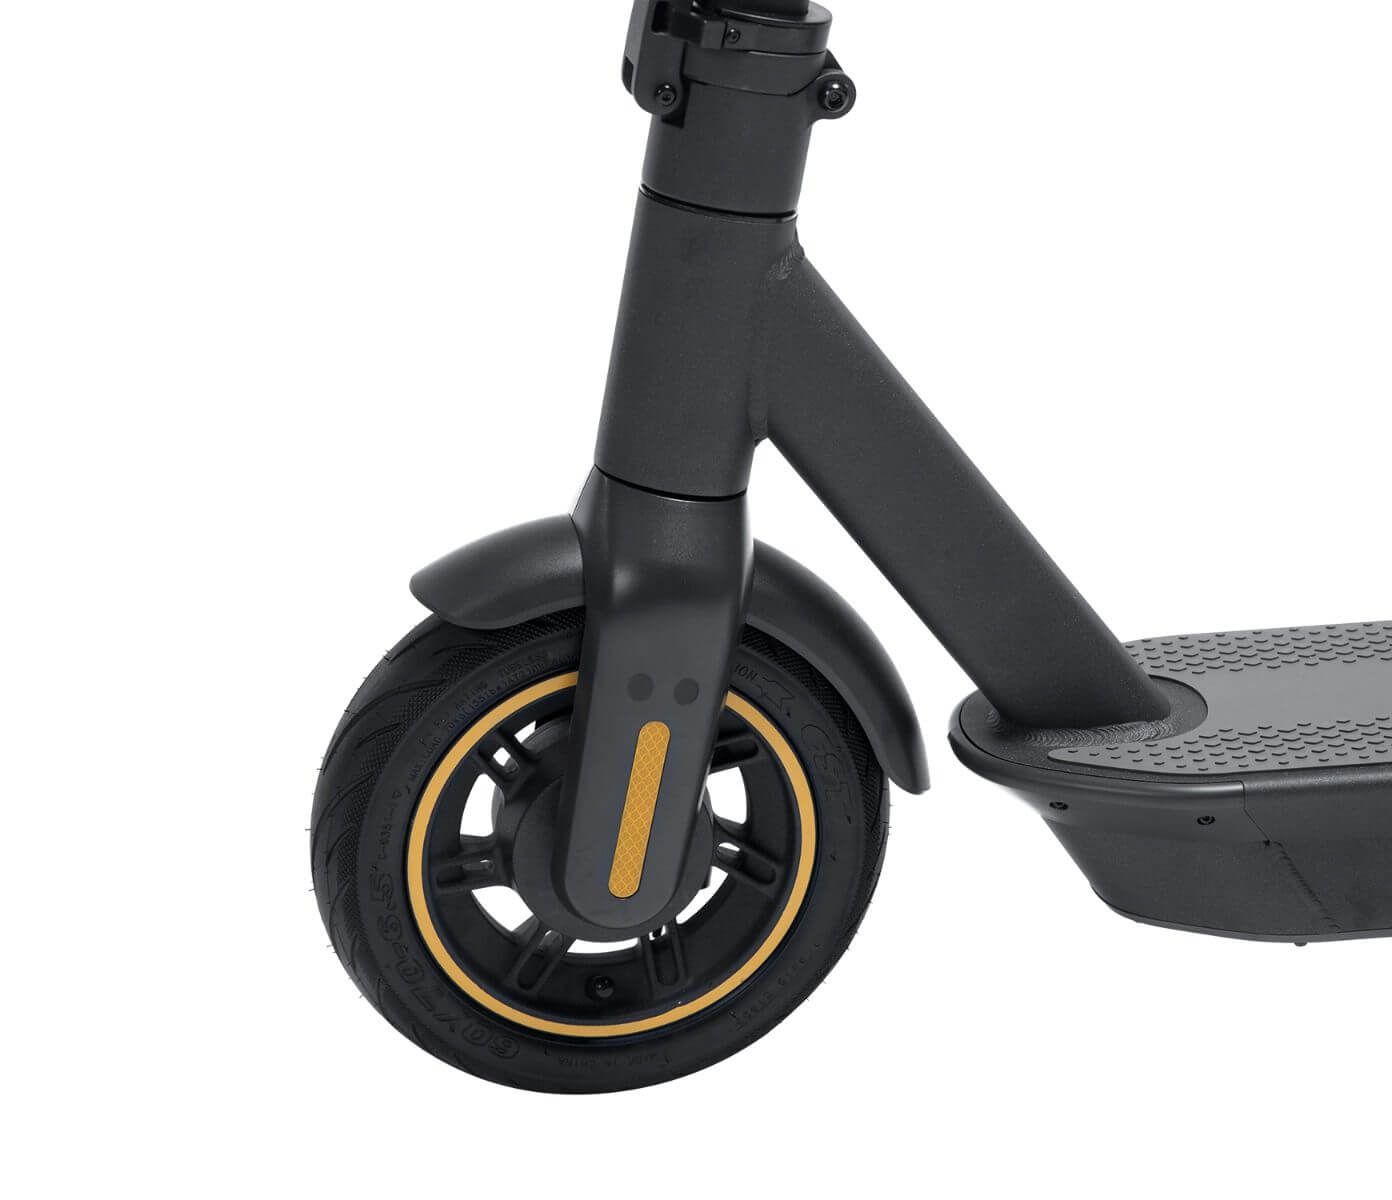 Ninebot Max G30P Kickscooter by Segway - Certified Factory Refurbished